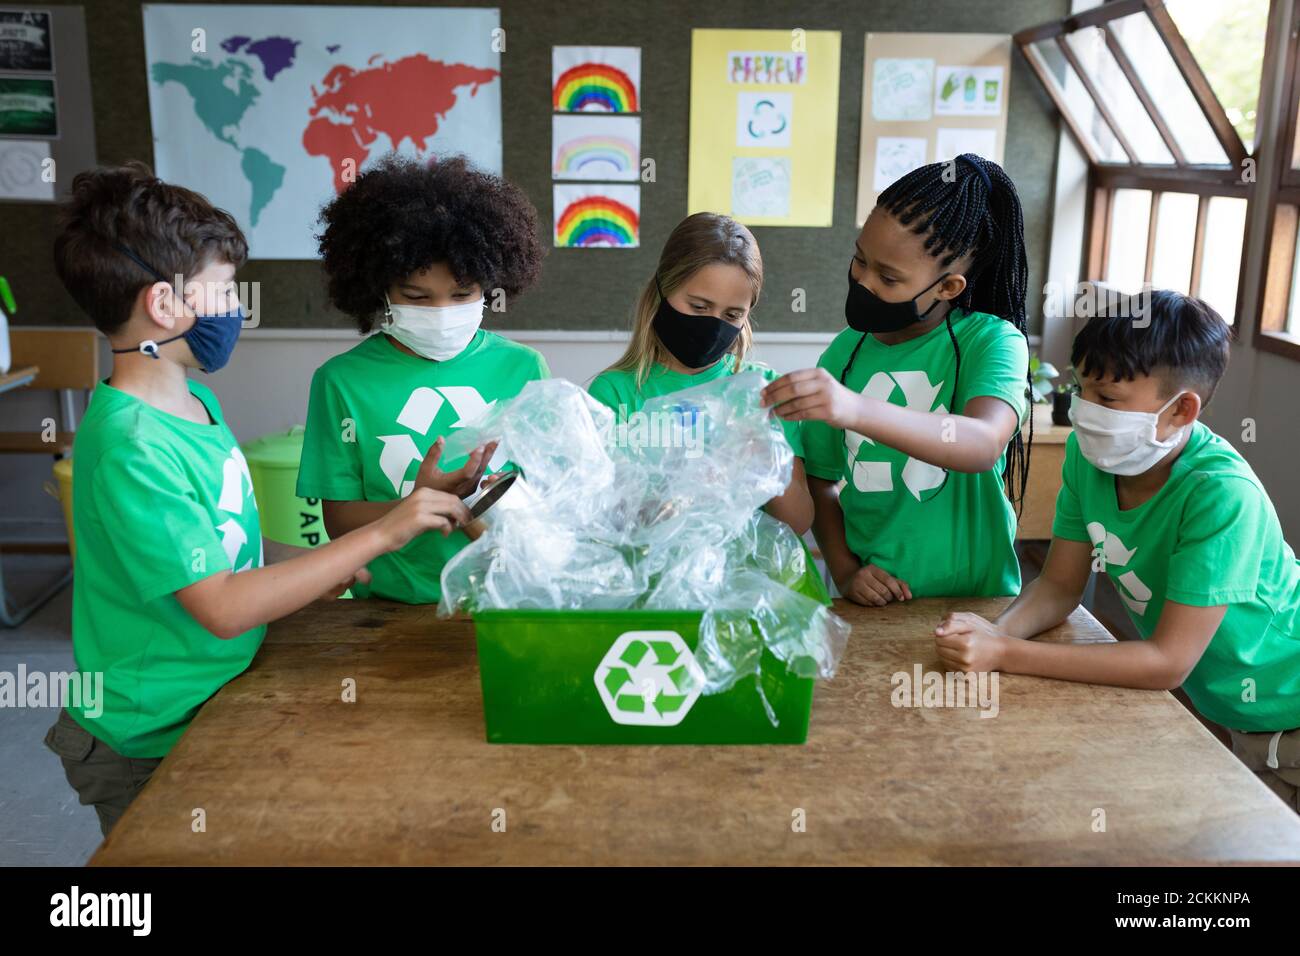 Portrait of group of kids wearing face masks touching plastics item in recycle container in class Stock Photo